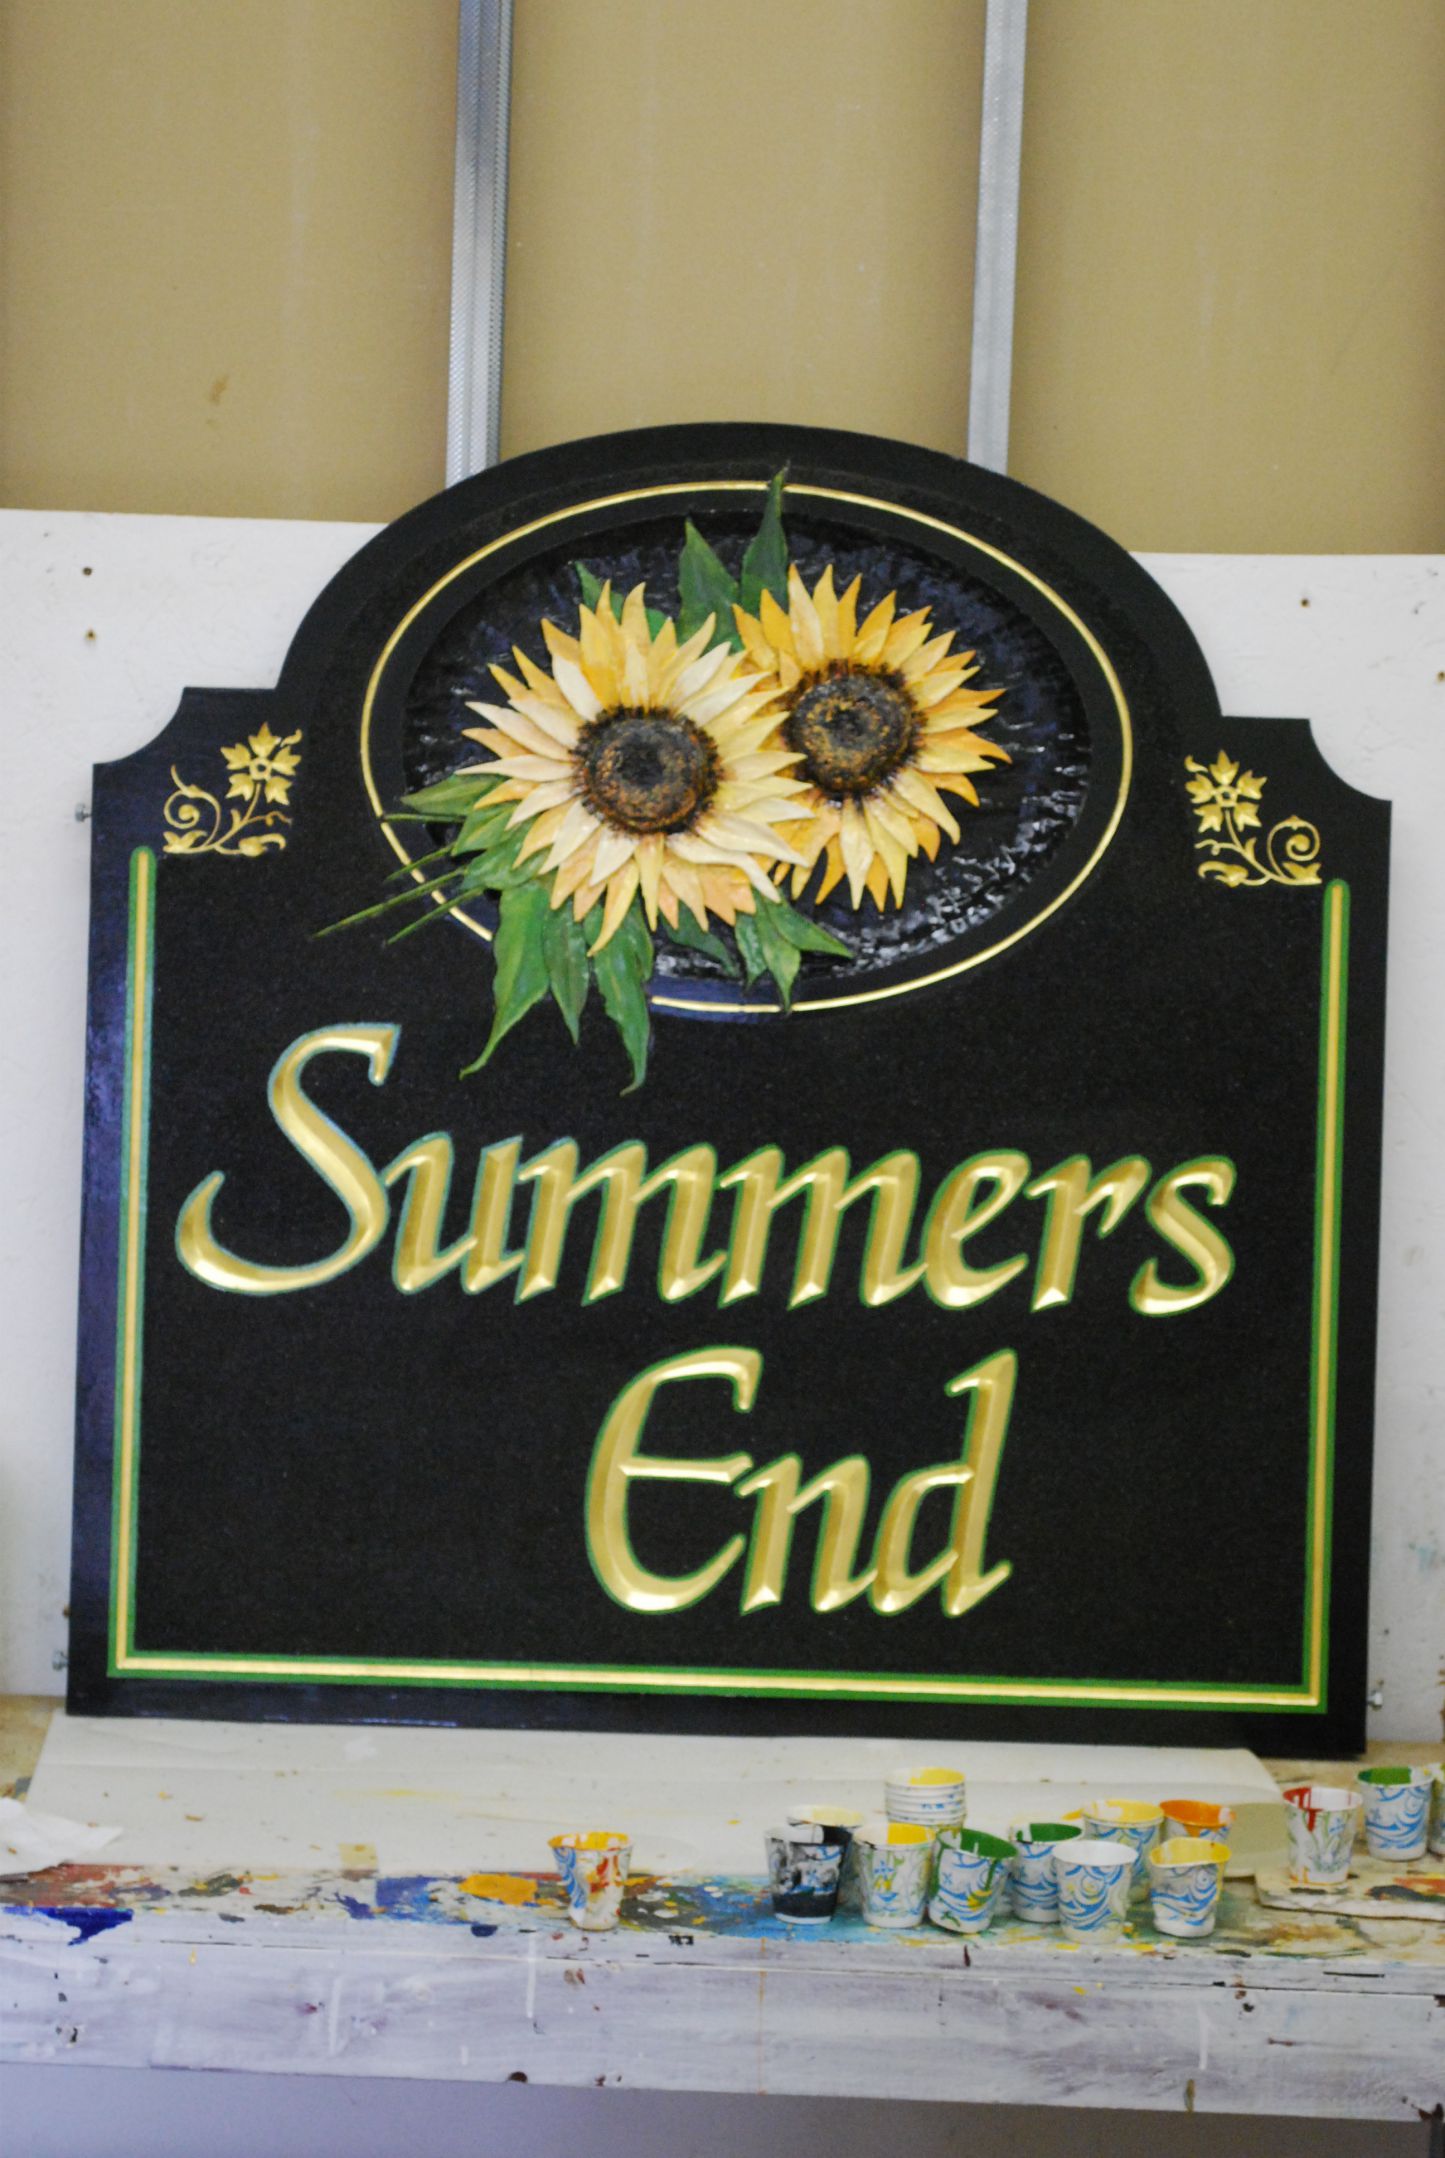 Sunmmers End